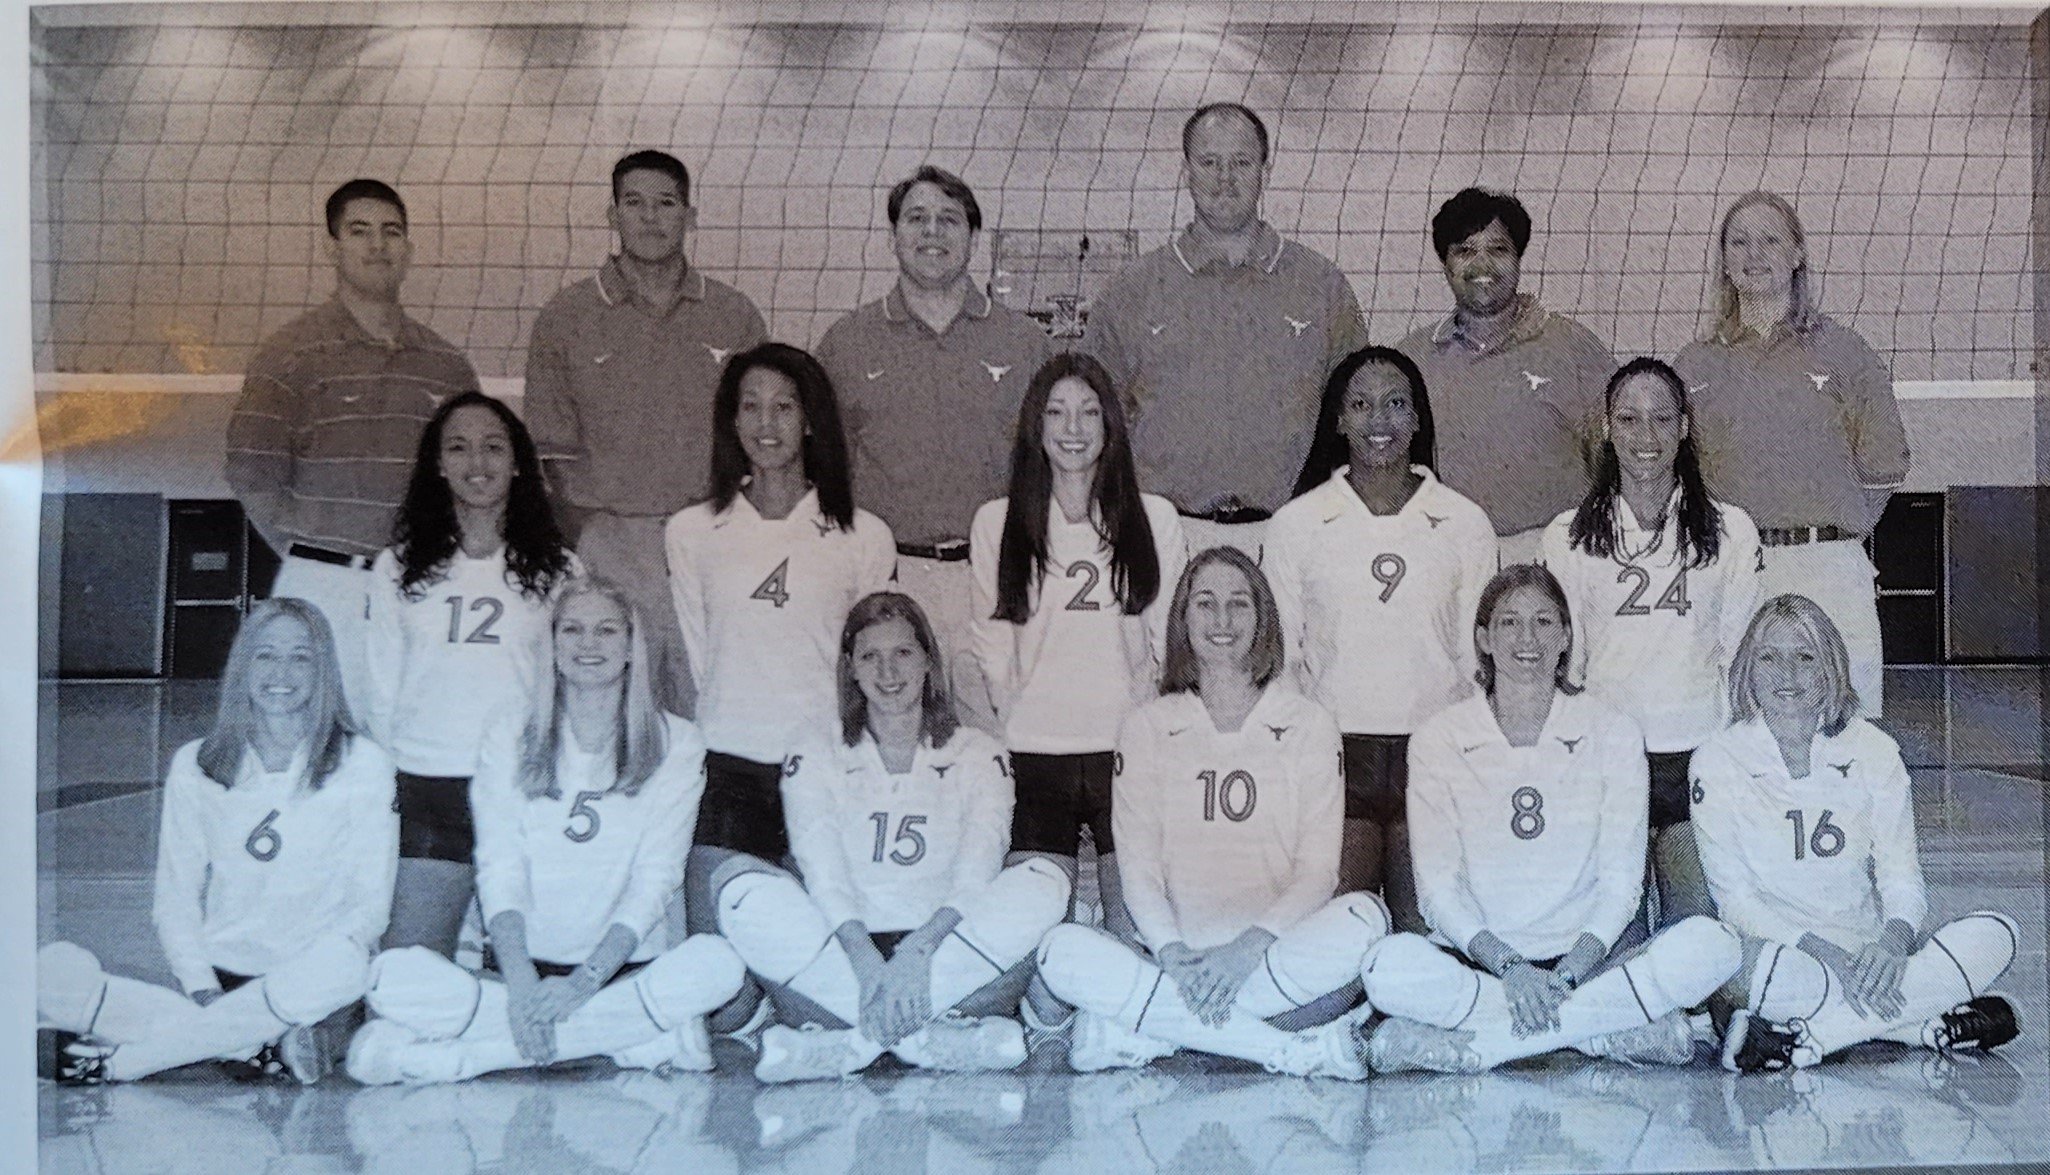  2003 volleyball  2003 volleyball  Top row- Fuentes, Chinh, Pulliza, Elliott, Johnson, Kuhr, middle- Acevedo, Magee, Andrew, Curtis, Armstrong, Front- Garvens, Howden, Topic, Wilson, Hahn, Larson 